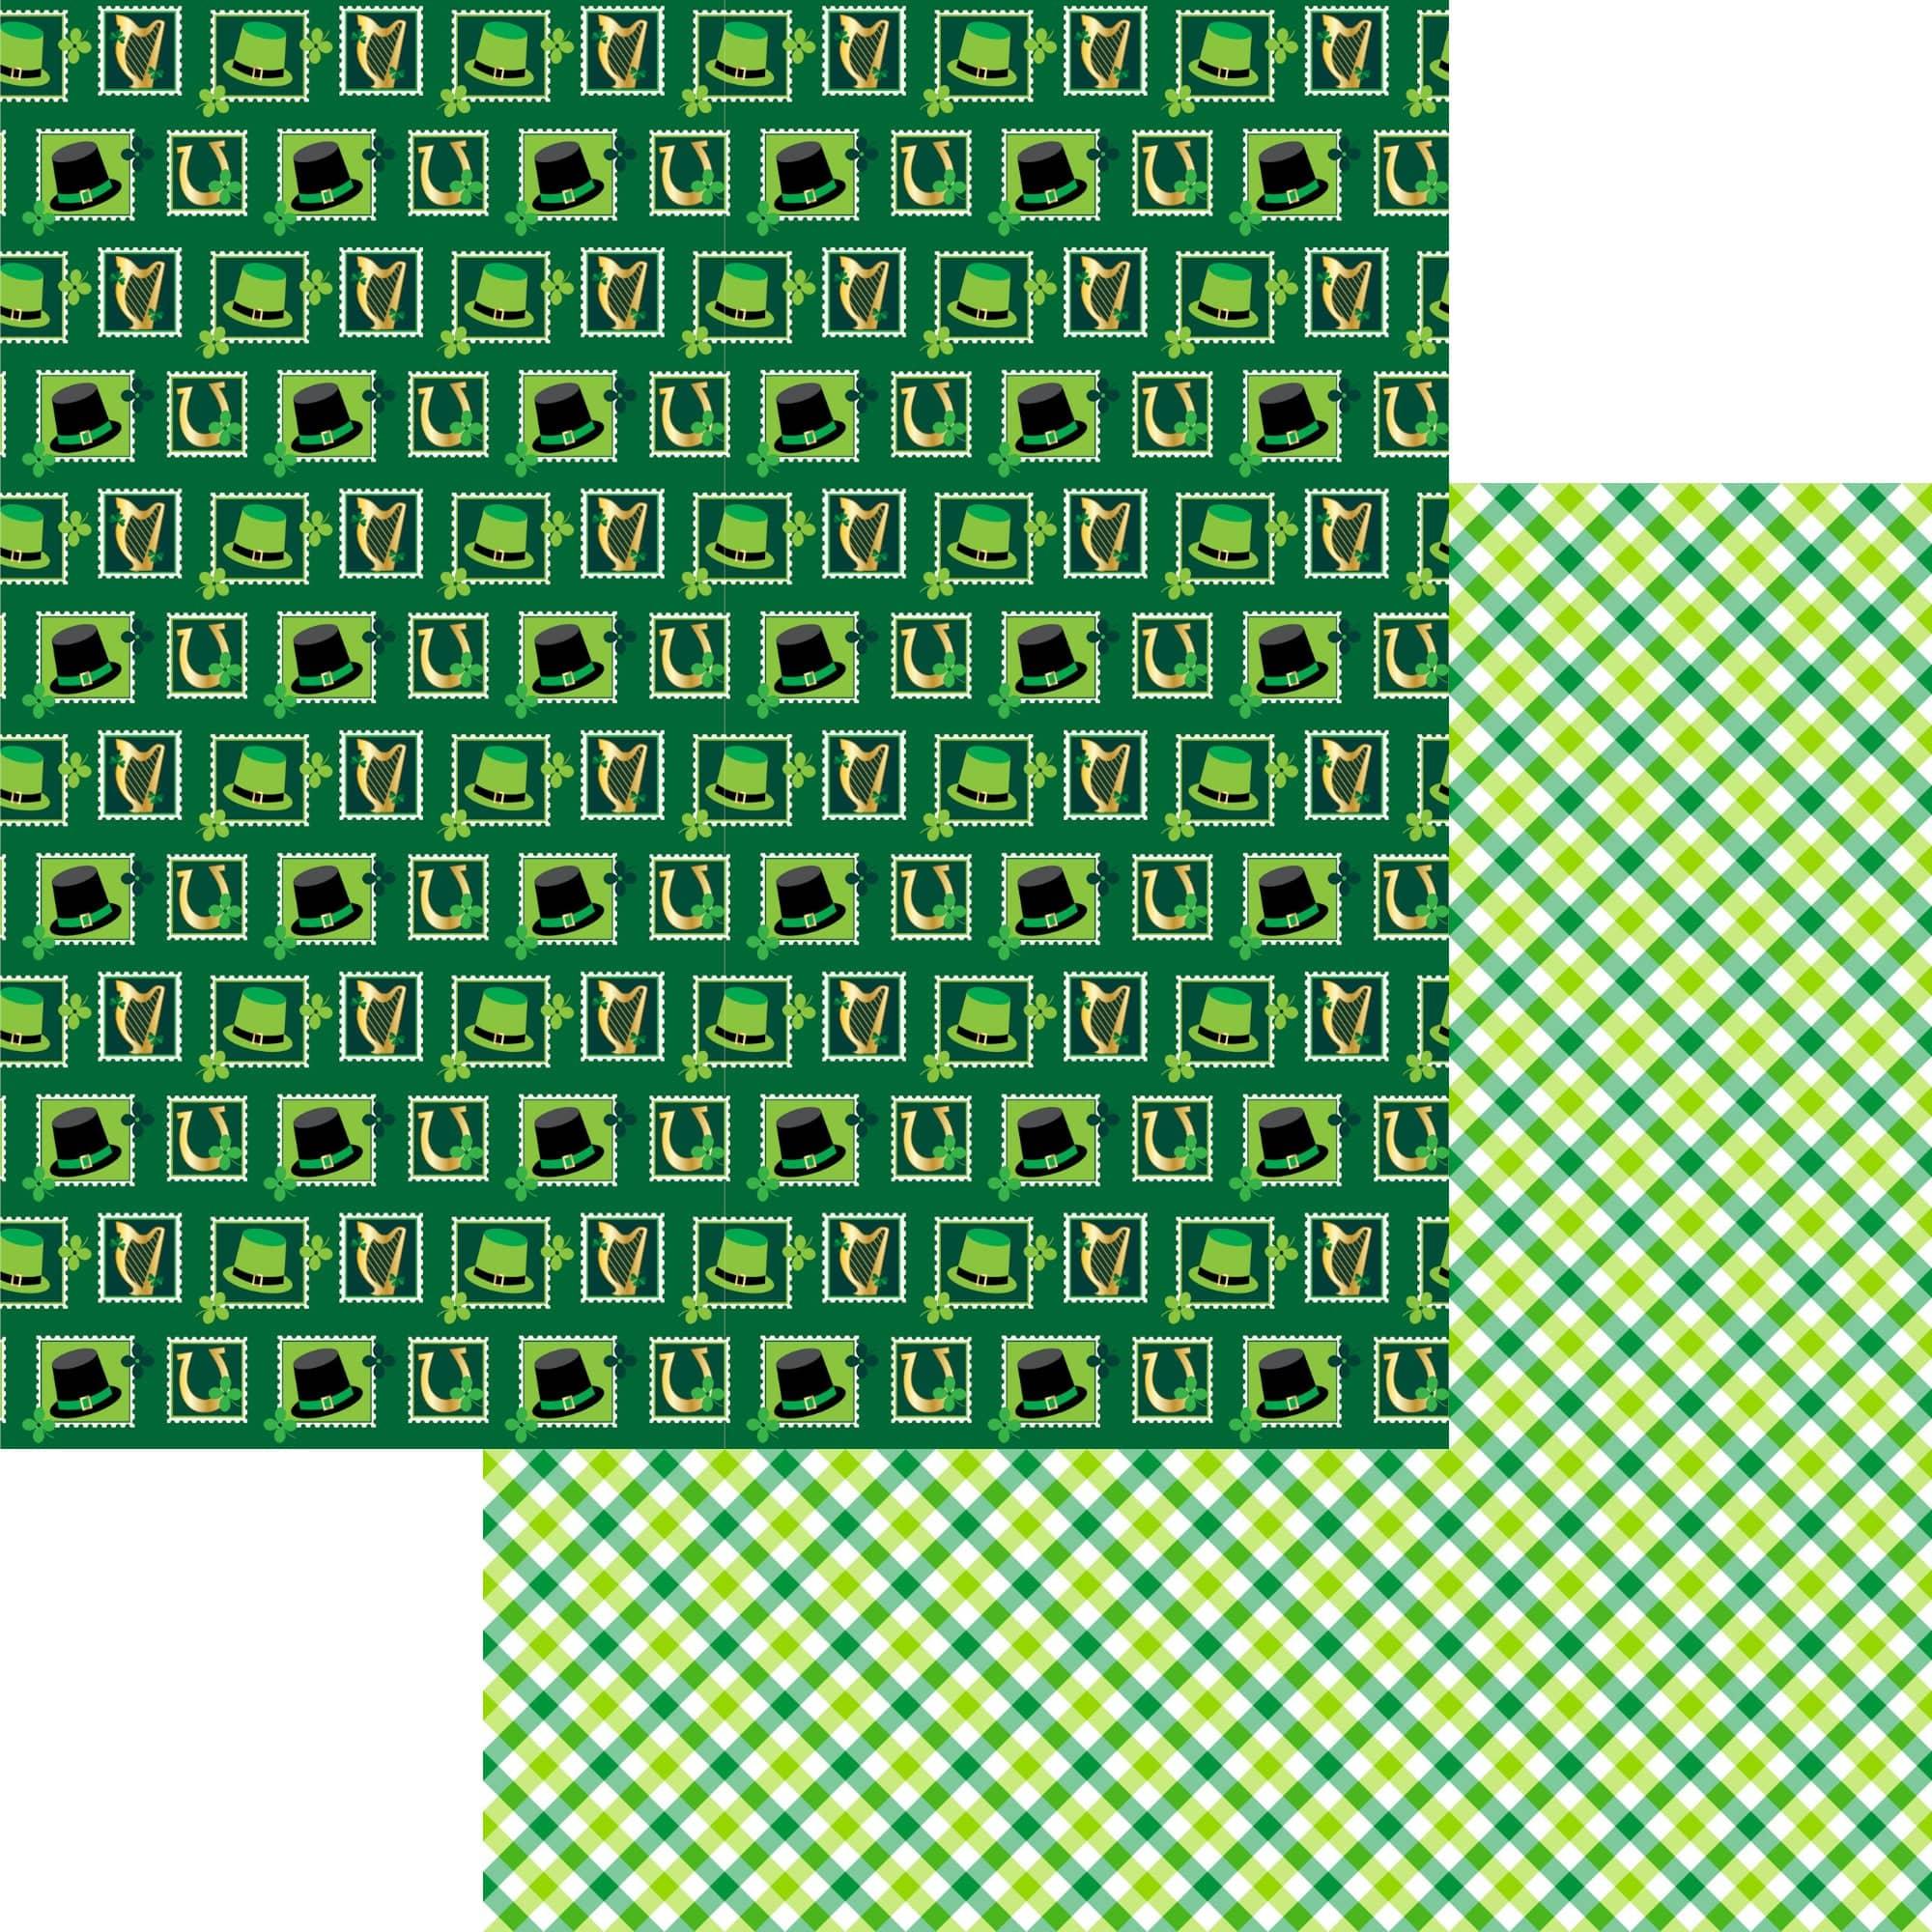 St. Pat's Traditional Collection Irish Icons 12 x 12 Double-Sided Scrapbook Paper by SSC Designs - Scrapbook Supply Companies